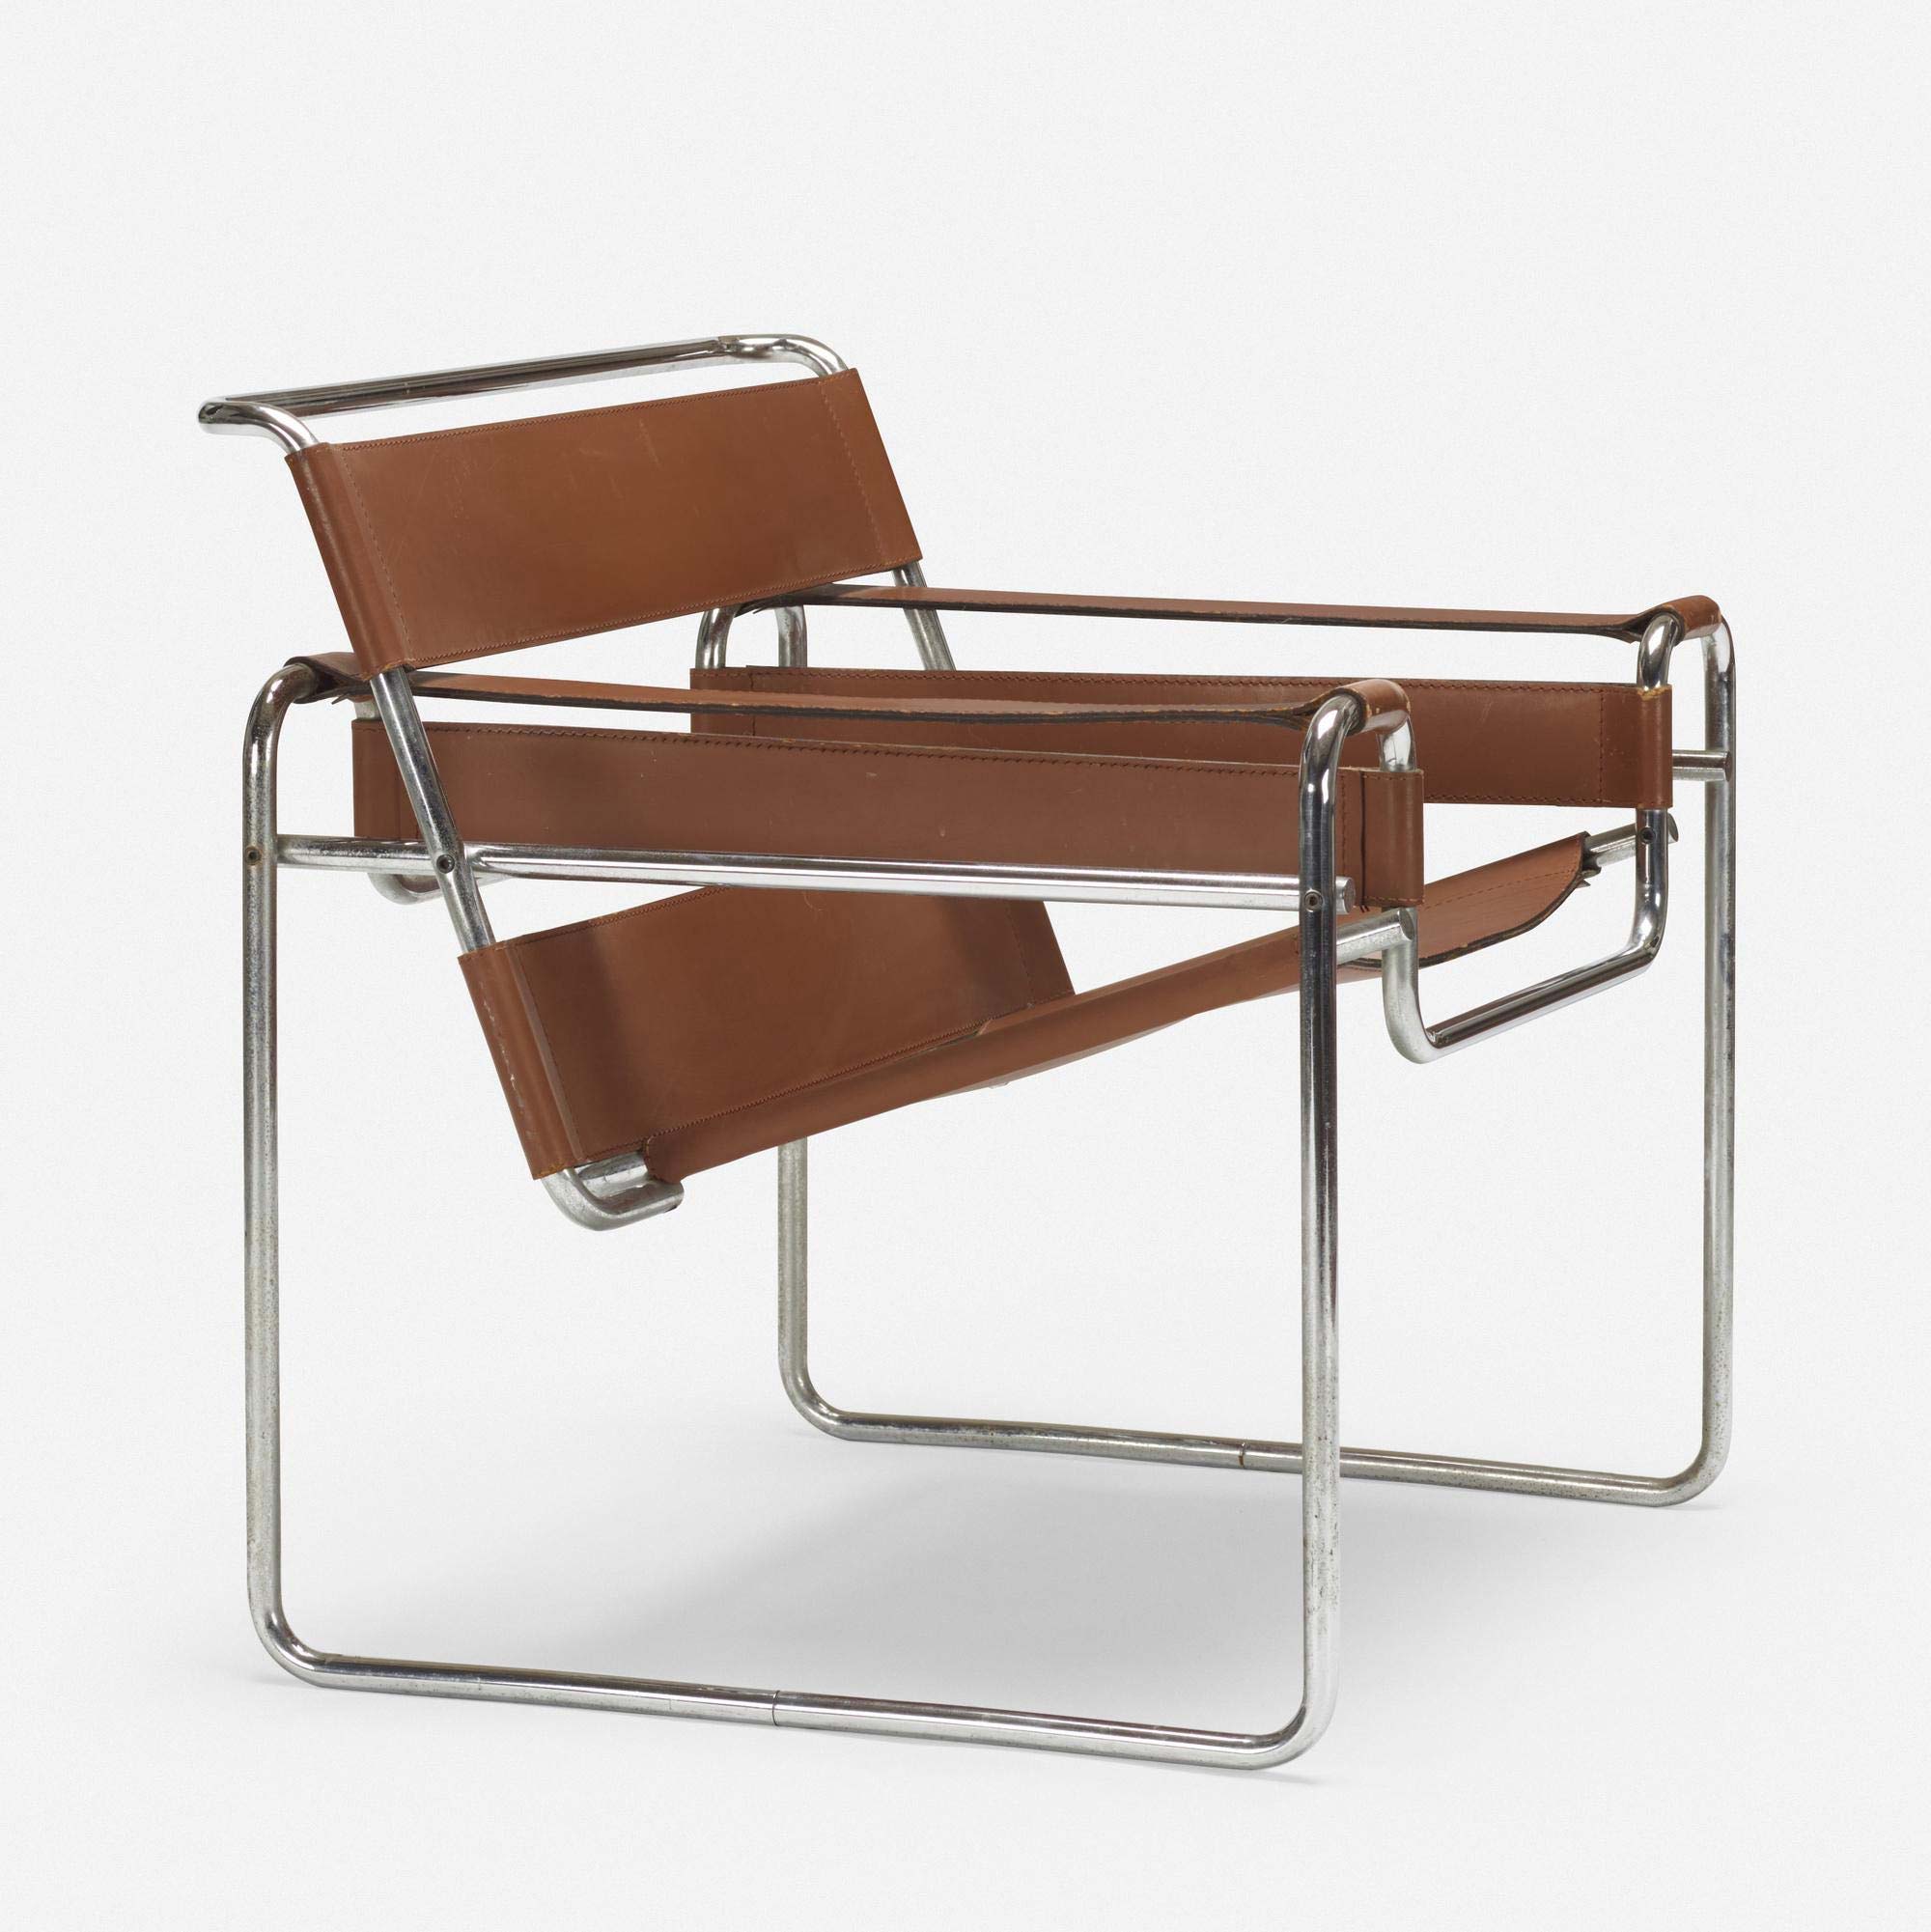 This Marcel Breuer Wassily chair, circa 1970, in chrome-plated steel and leather, fetched $4,000 plus buyer’s premium in September 2020 at Wright. Photo courtesy of Wright and LiveAuctioneers